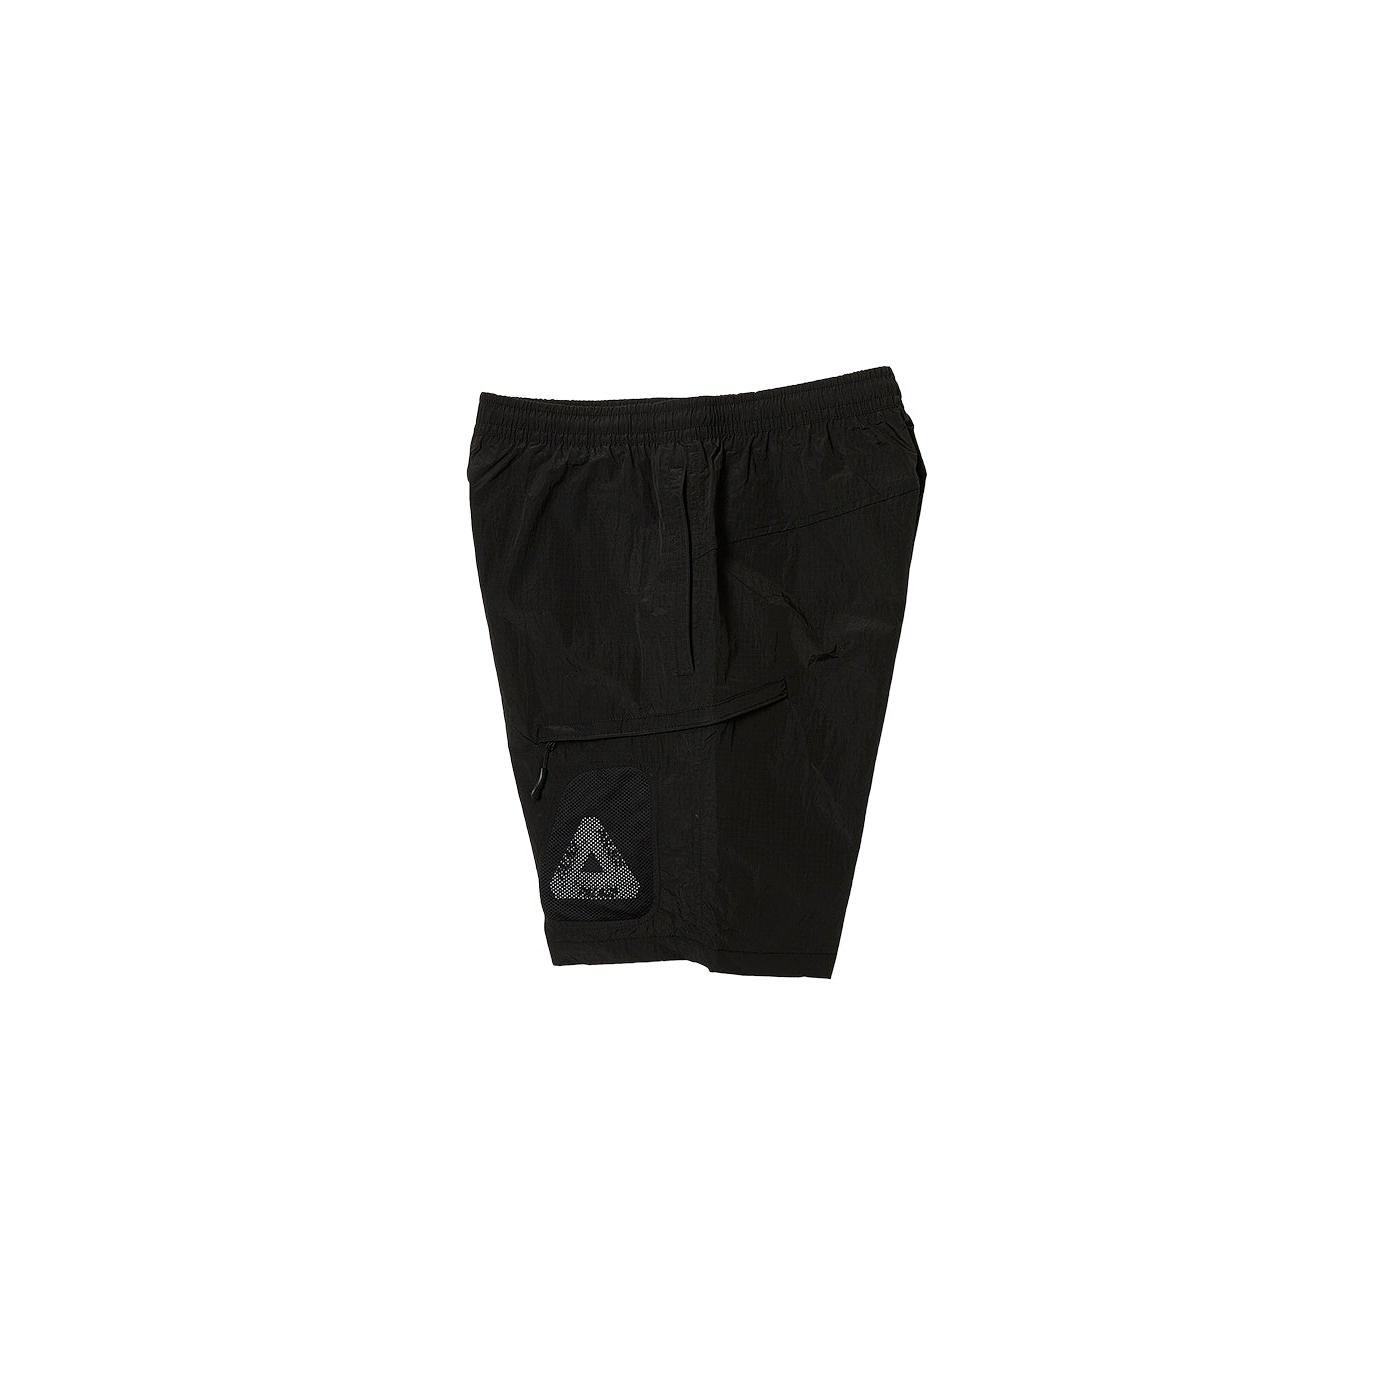 Thumbnail Y-RIPSTOP SHELL SHORT BLACK one color